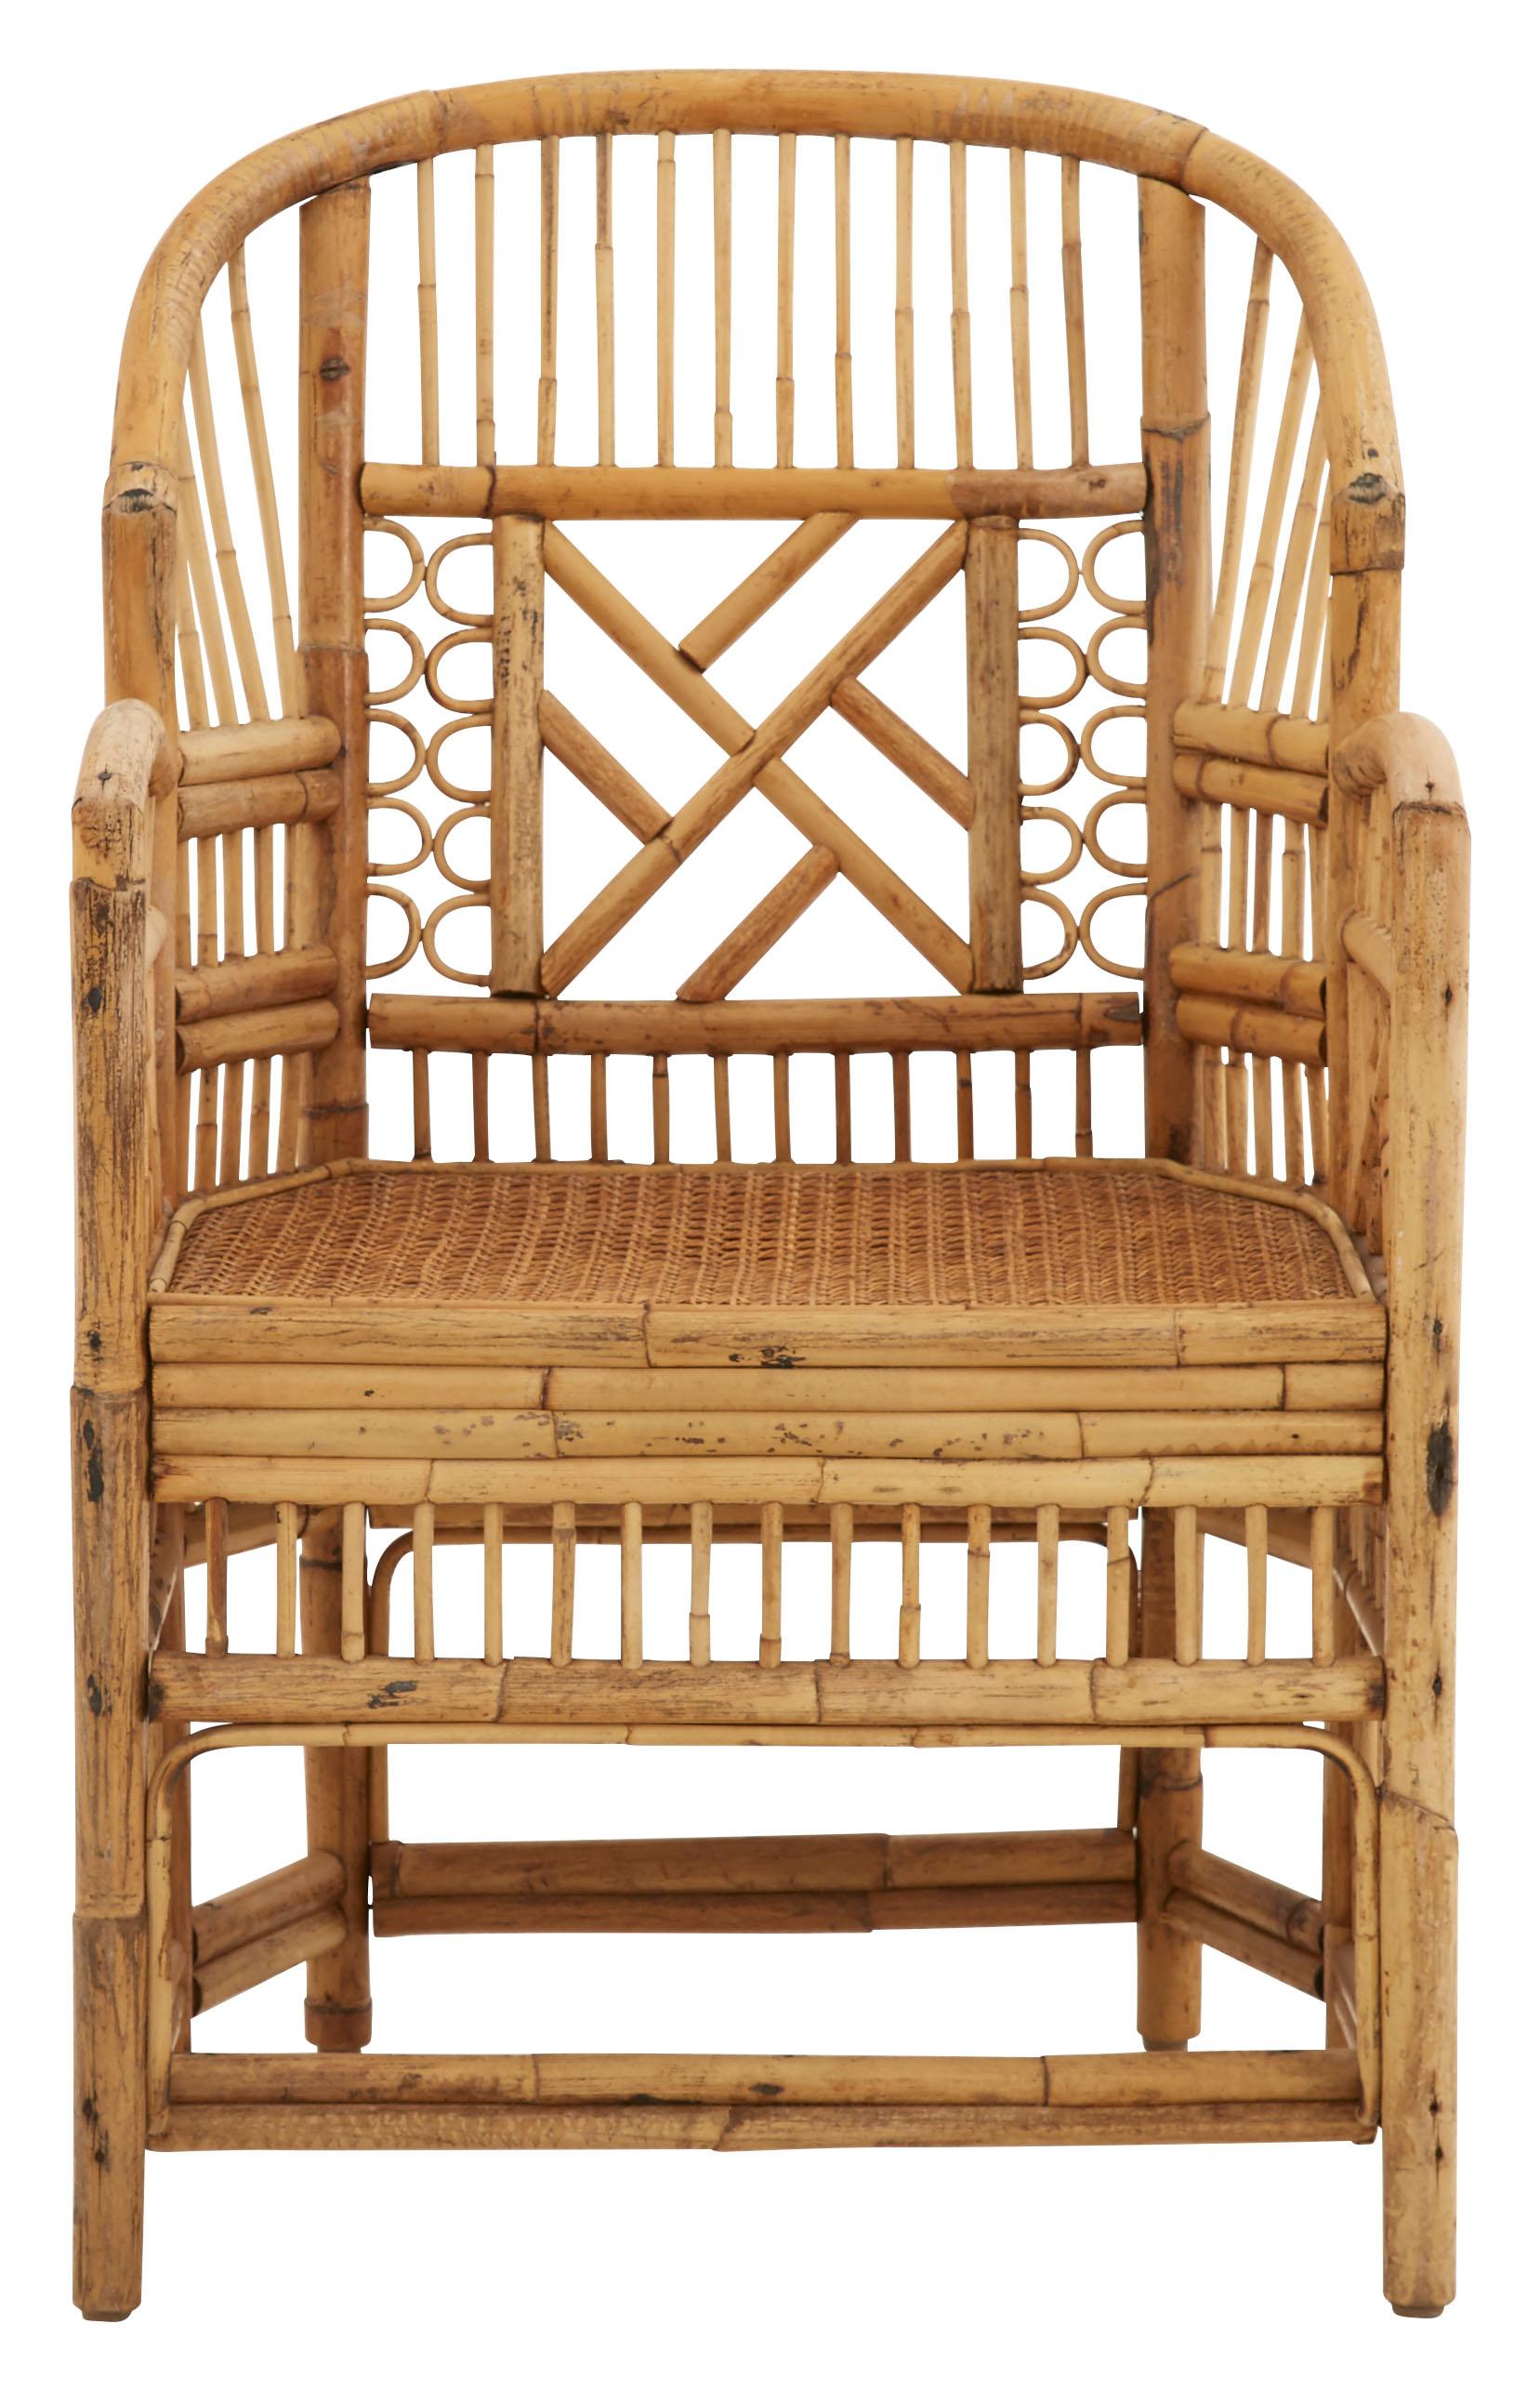 • Bamboo and rattan
• Original cane seat
• Mid-20th century
• American

Dimensions
• Overall 23.5